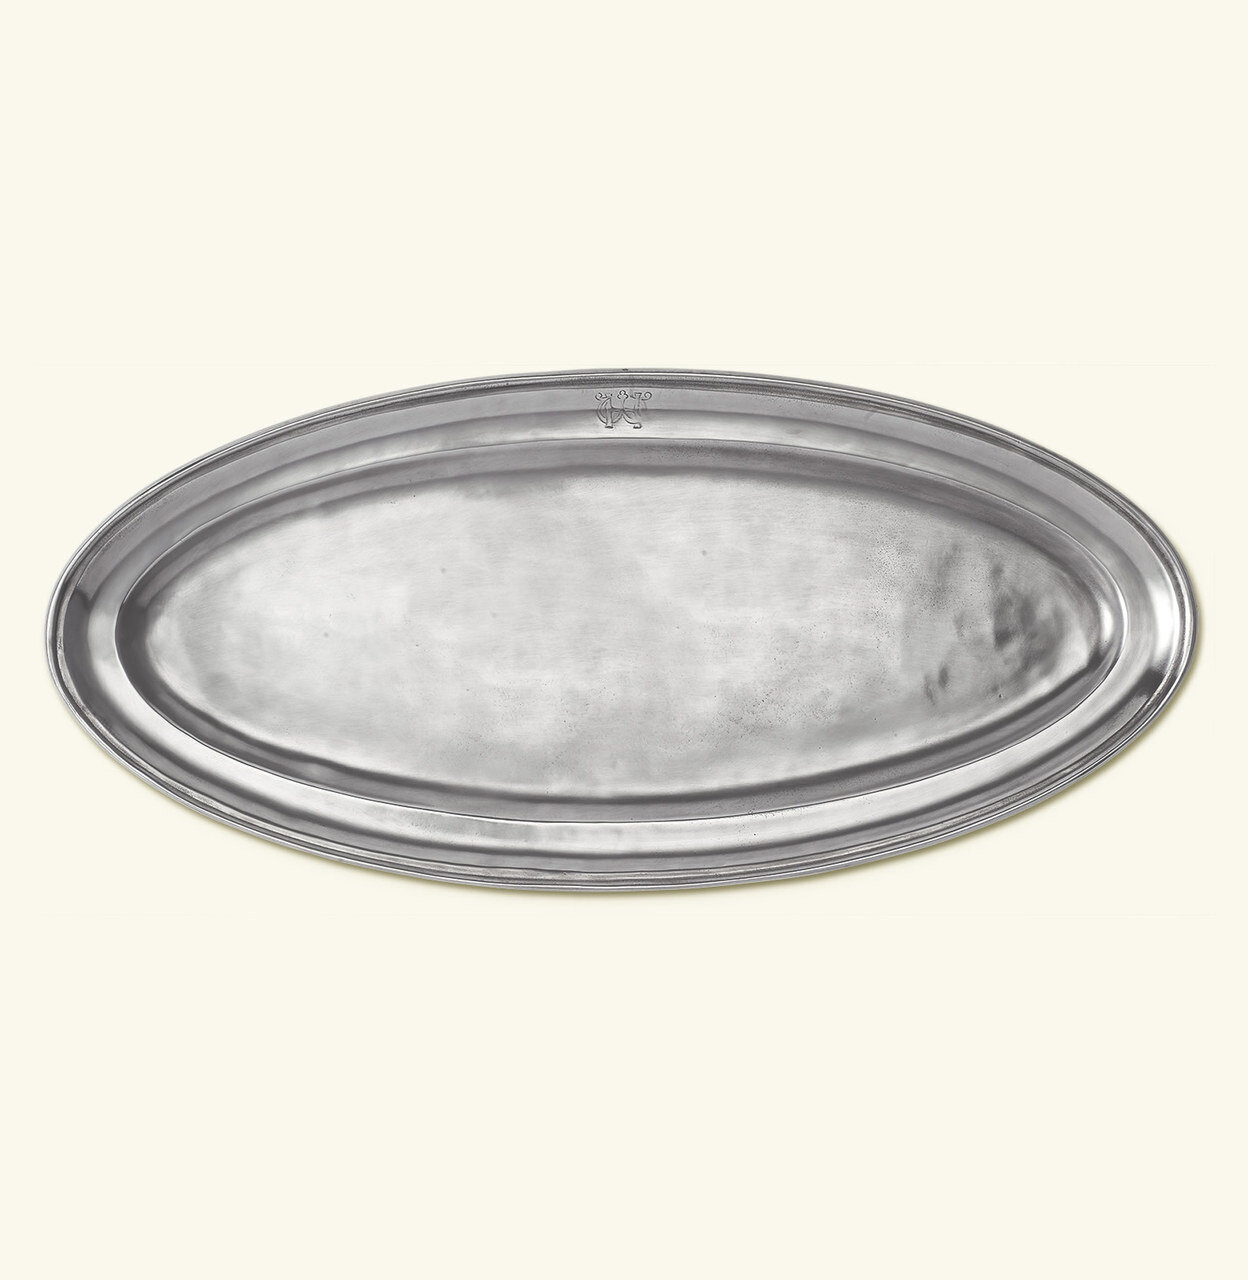 Match Pewter Oval Fish Platter Lungo a436.0